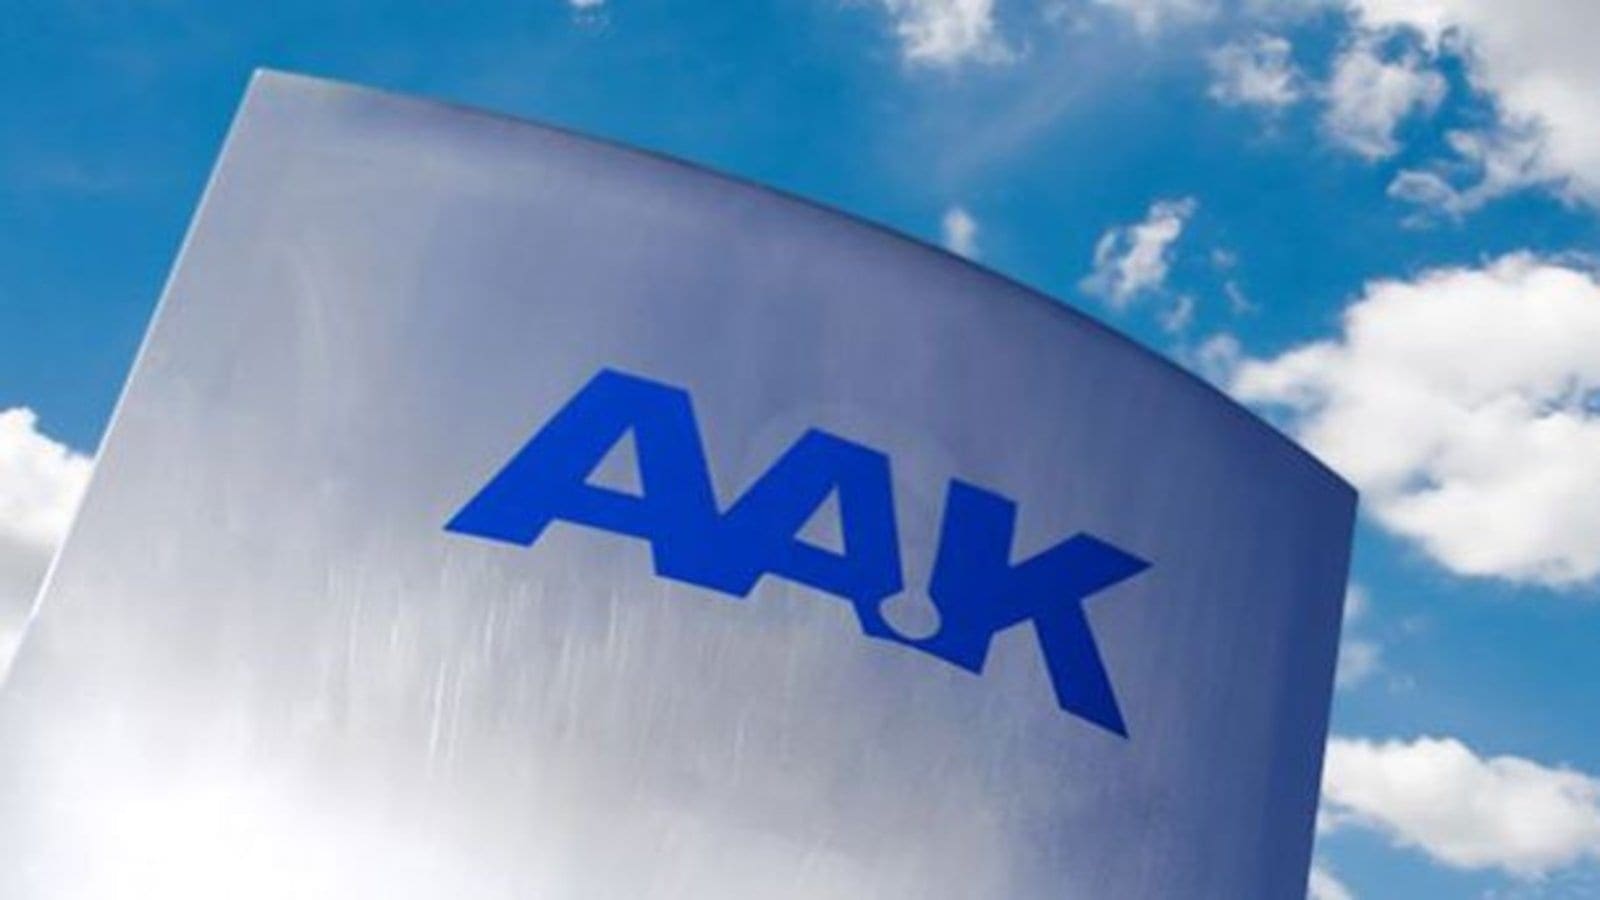 AAK joins list of food companies suspending shipments to Russia  